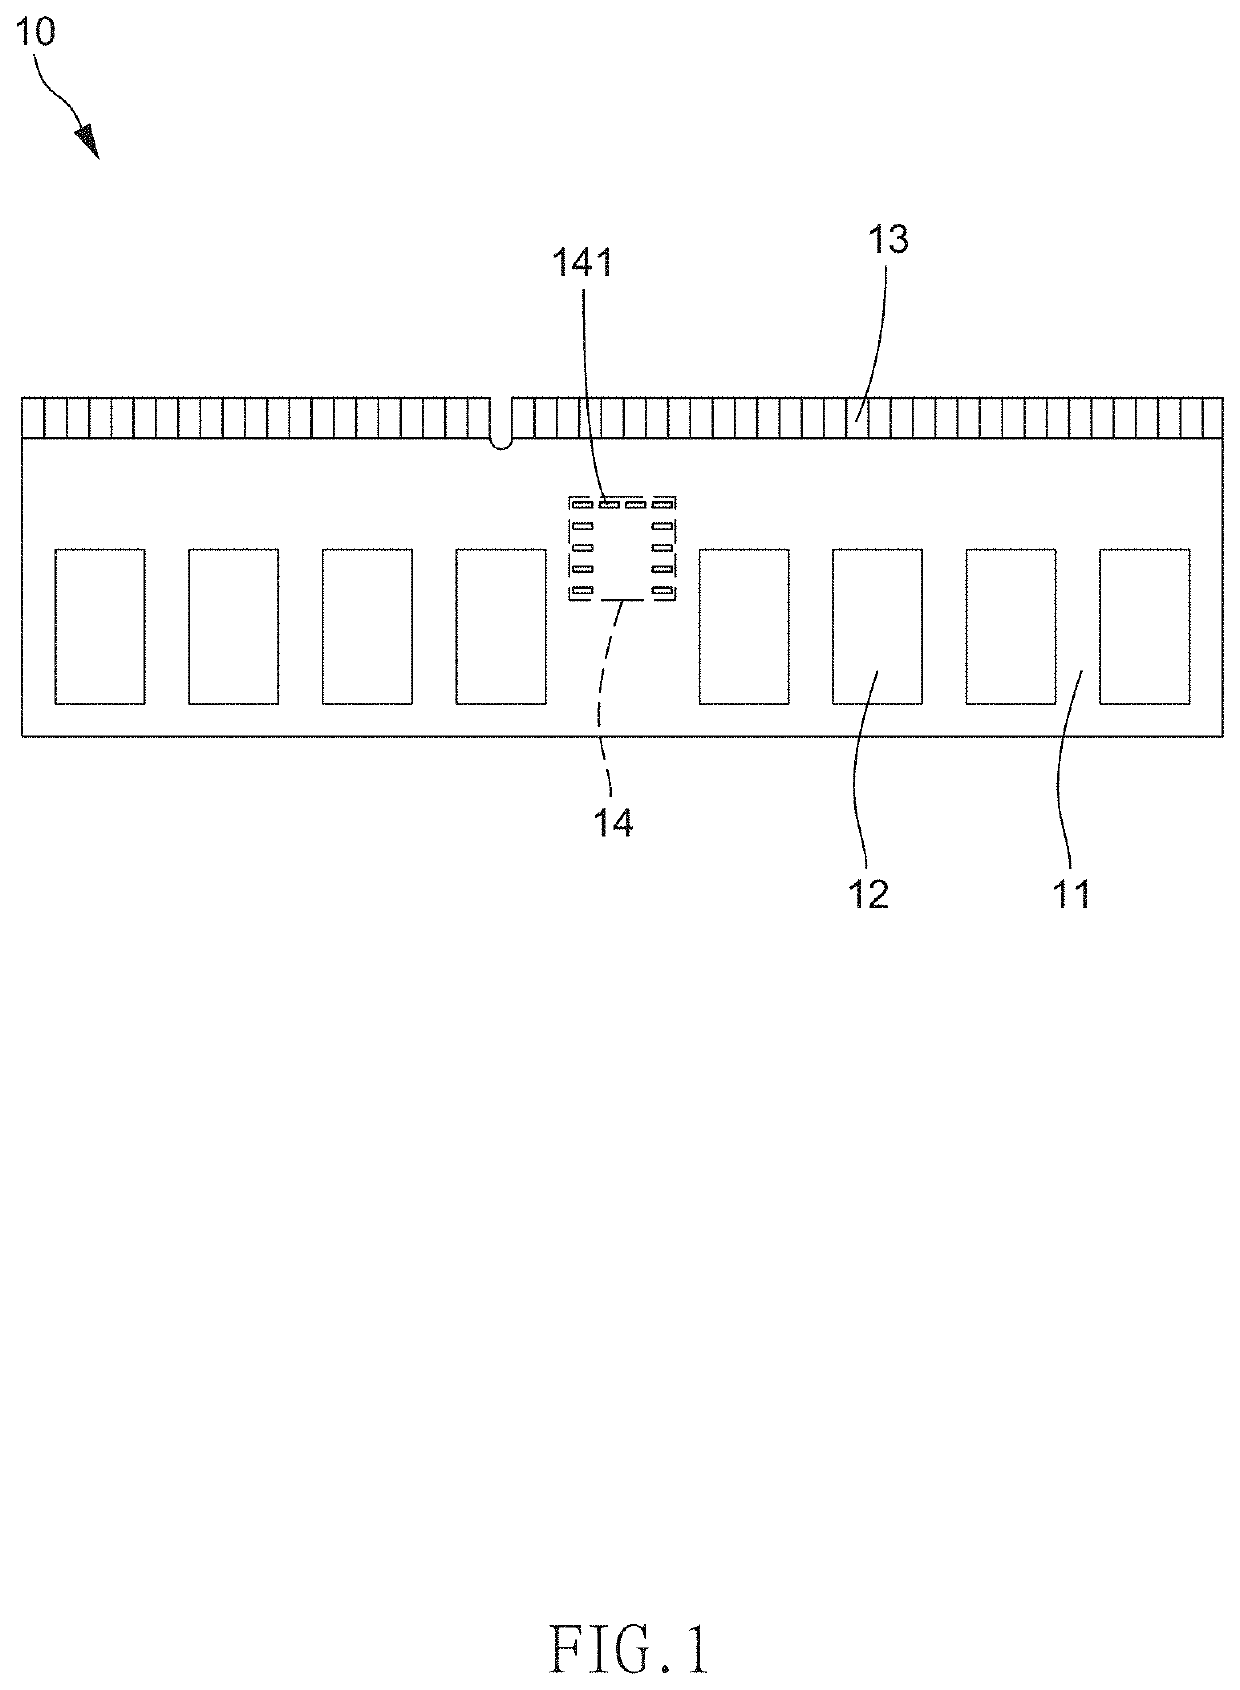 Structure of memory module and modification method of memory module